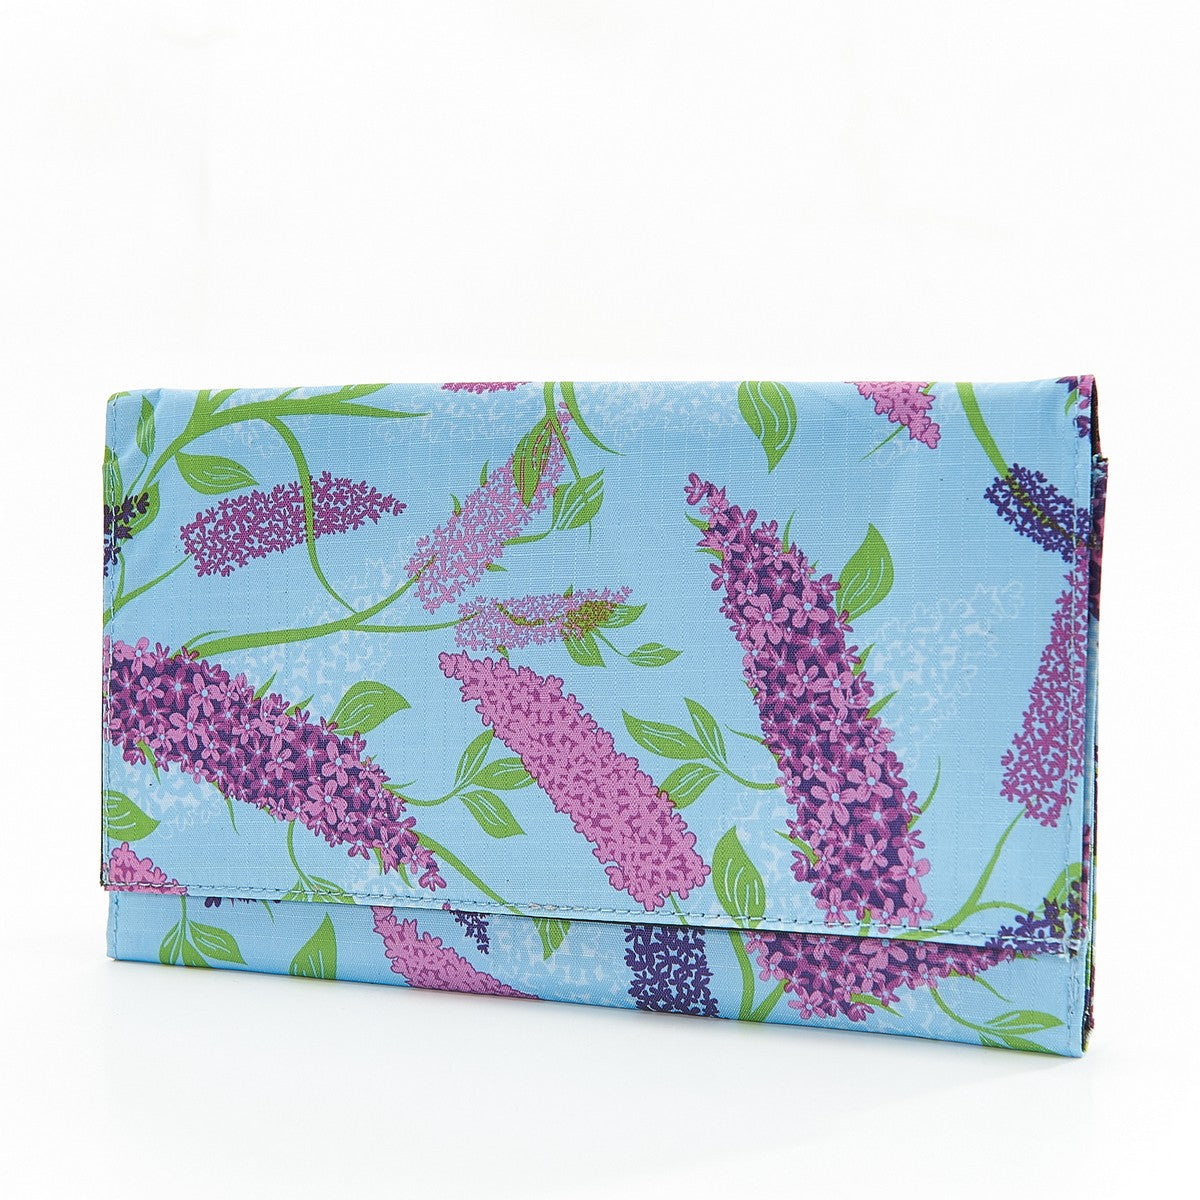 Travel Document Wallet by Eco Chic Waterproof & Durable Fabric Buddleia Design - Blue